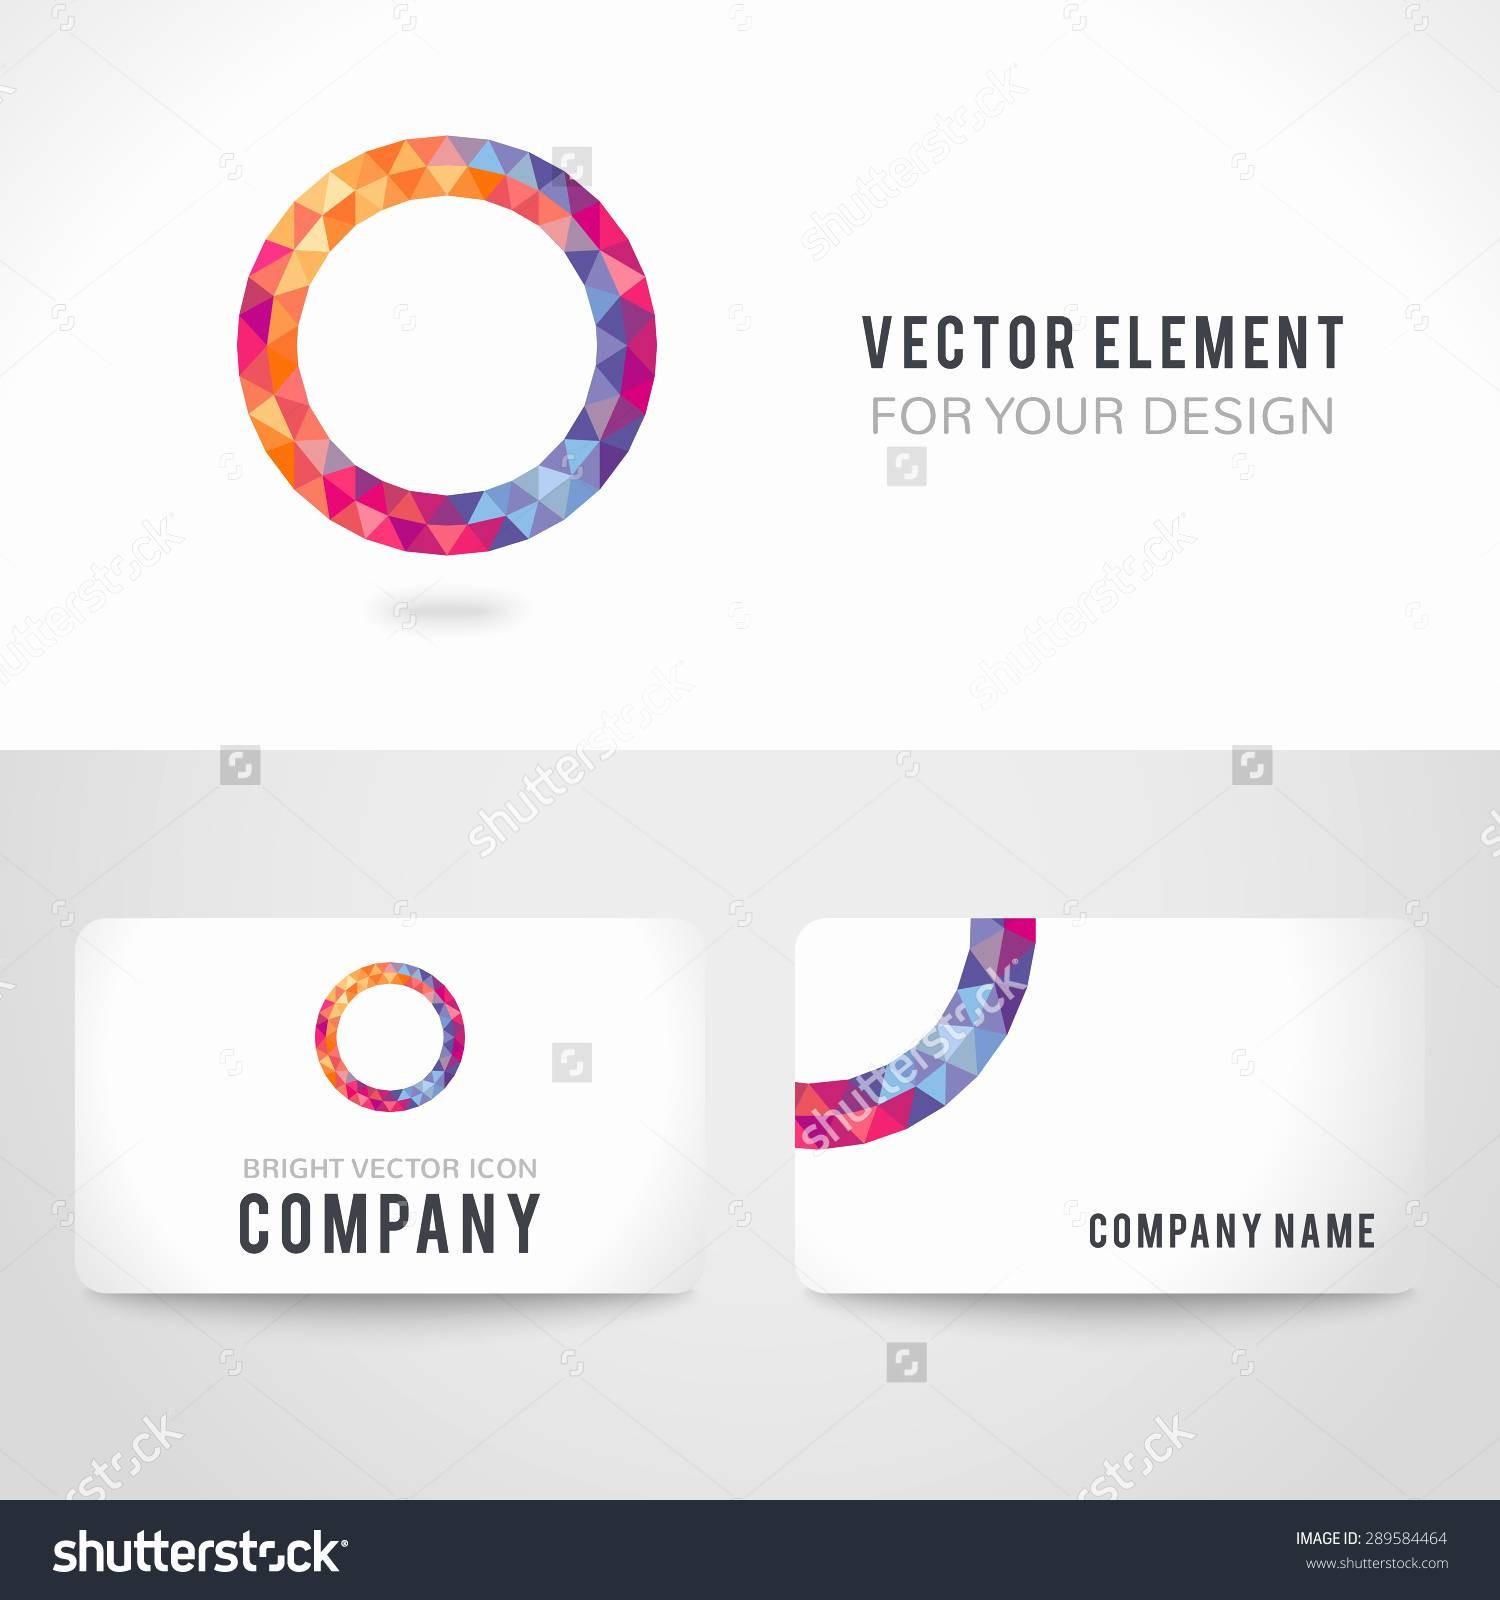 Rounded Corner Business Card Template Vistaprint Moo Of Rounded Corner Business Card Template